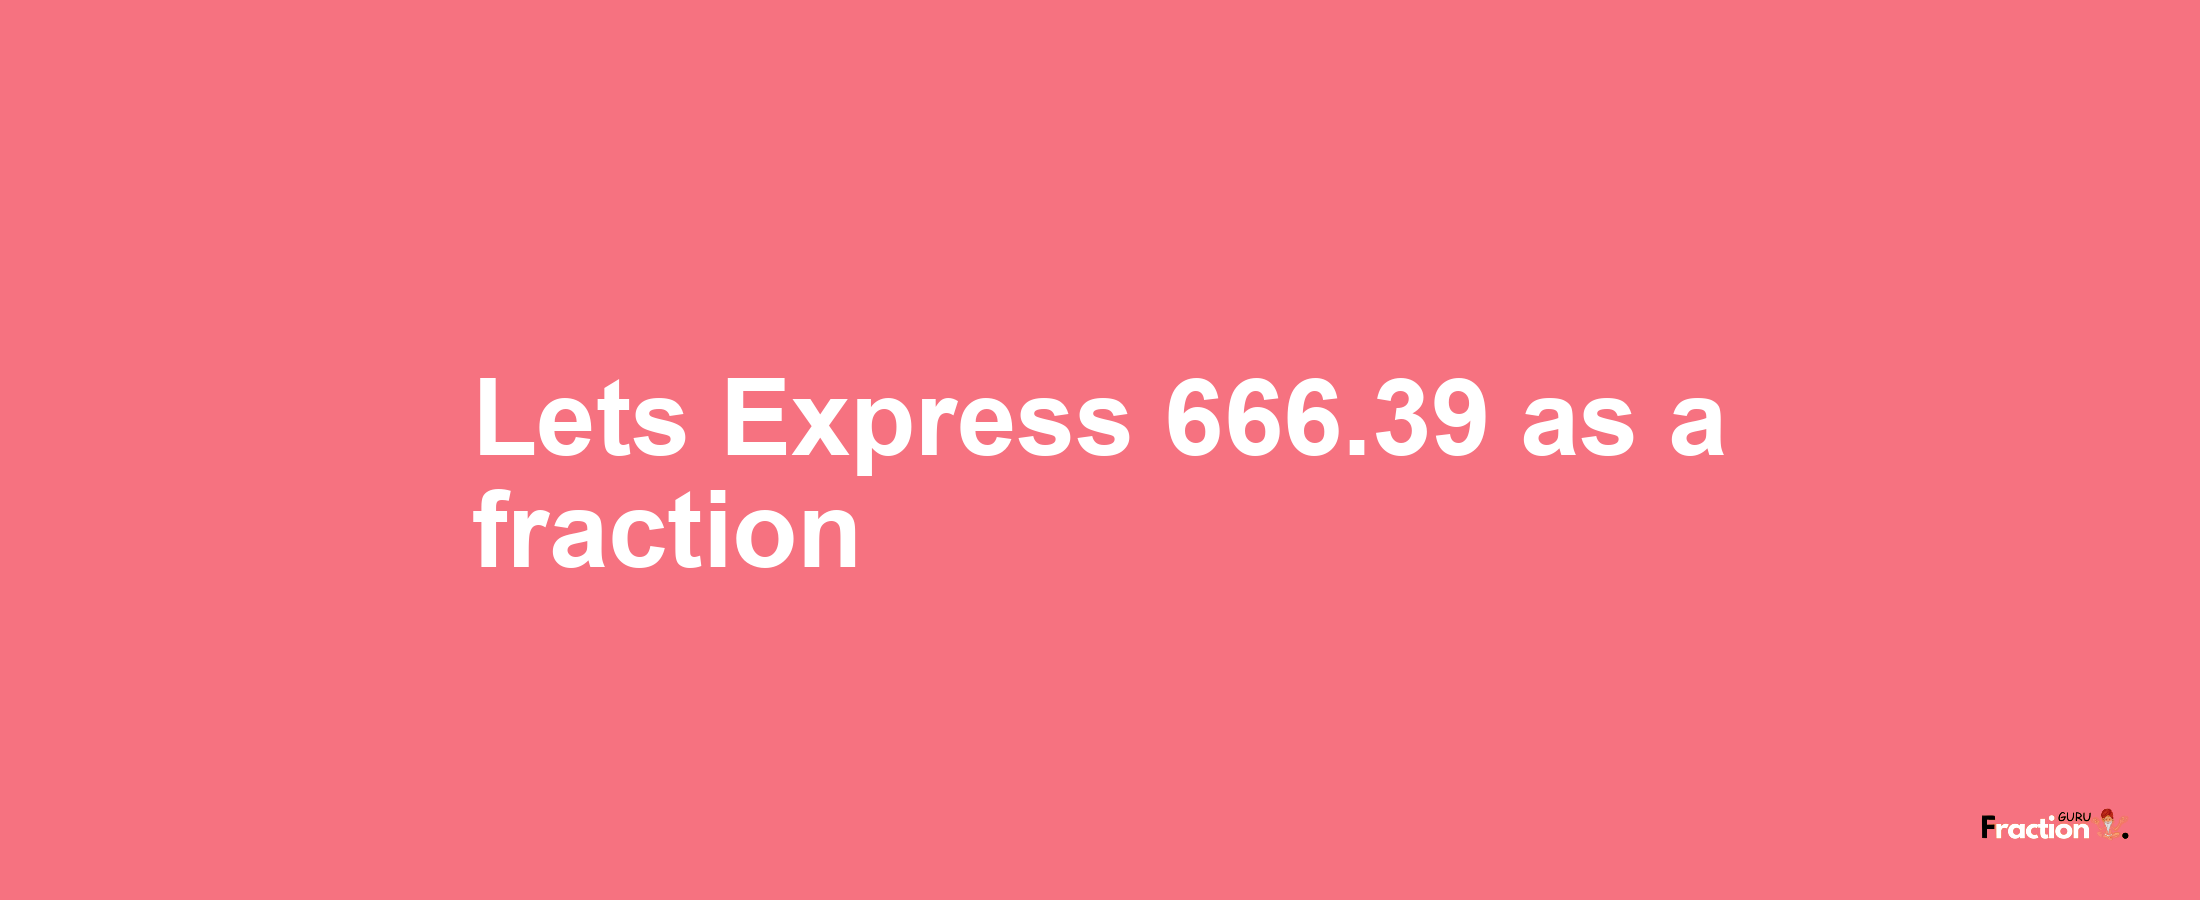 Lets Express 666.39 as afraction